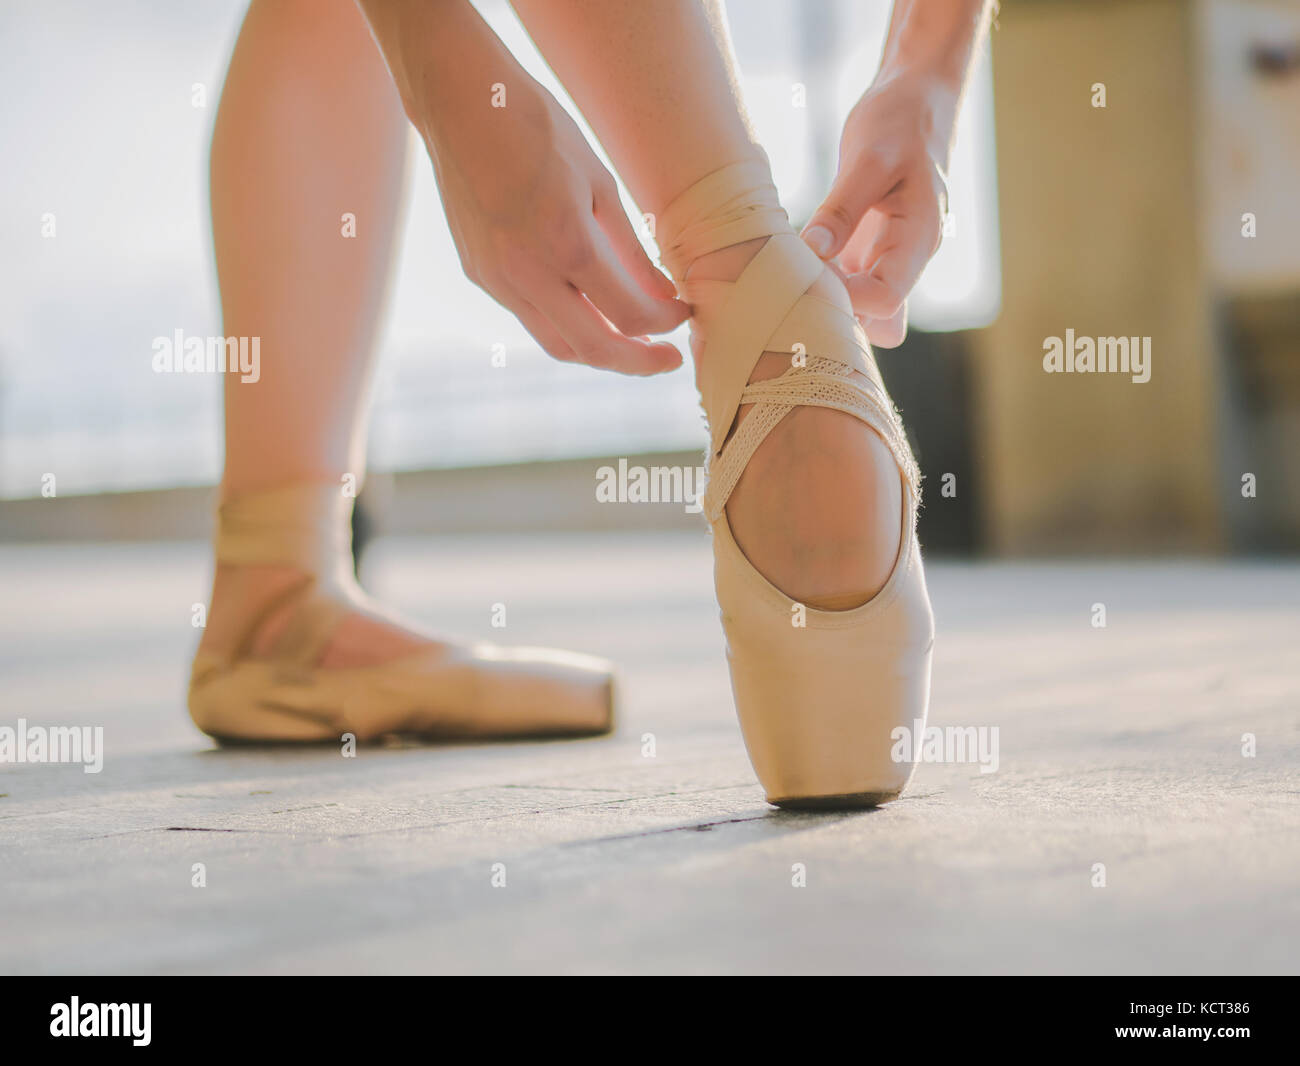 Close up of a ballet dancer's feet as she practices pointe exercises on the stone embankment. Woman's feet in pointe shoes. Ballerina shows classic ba Stock Photo